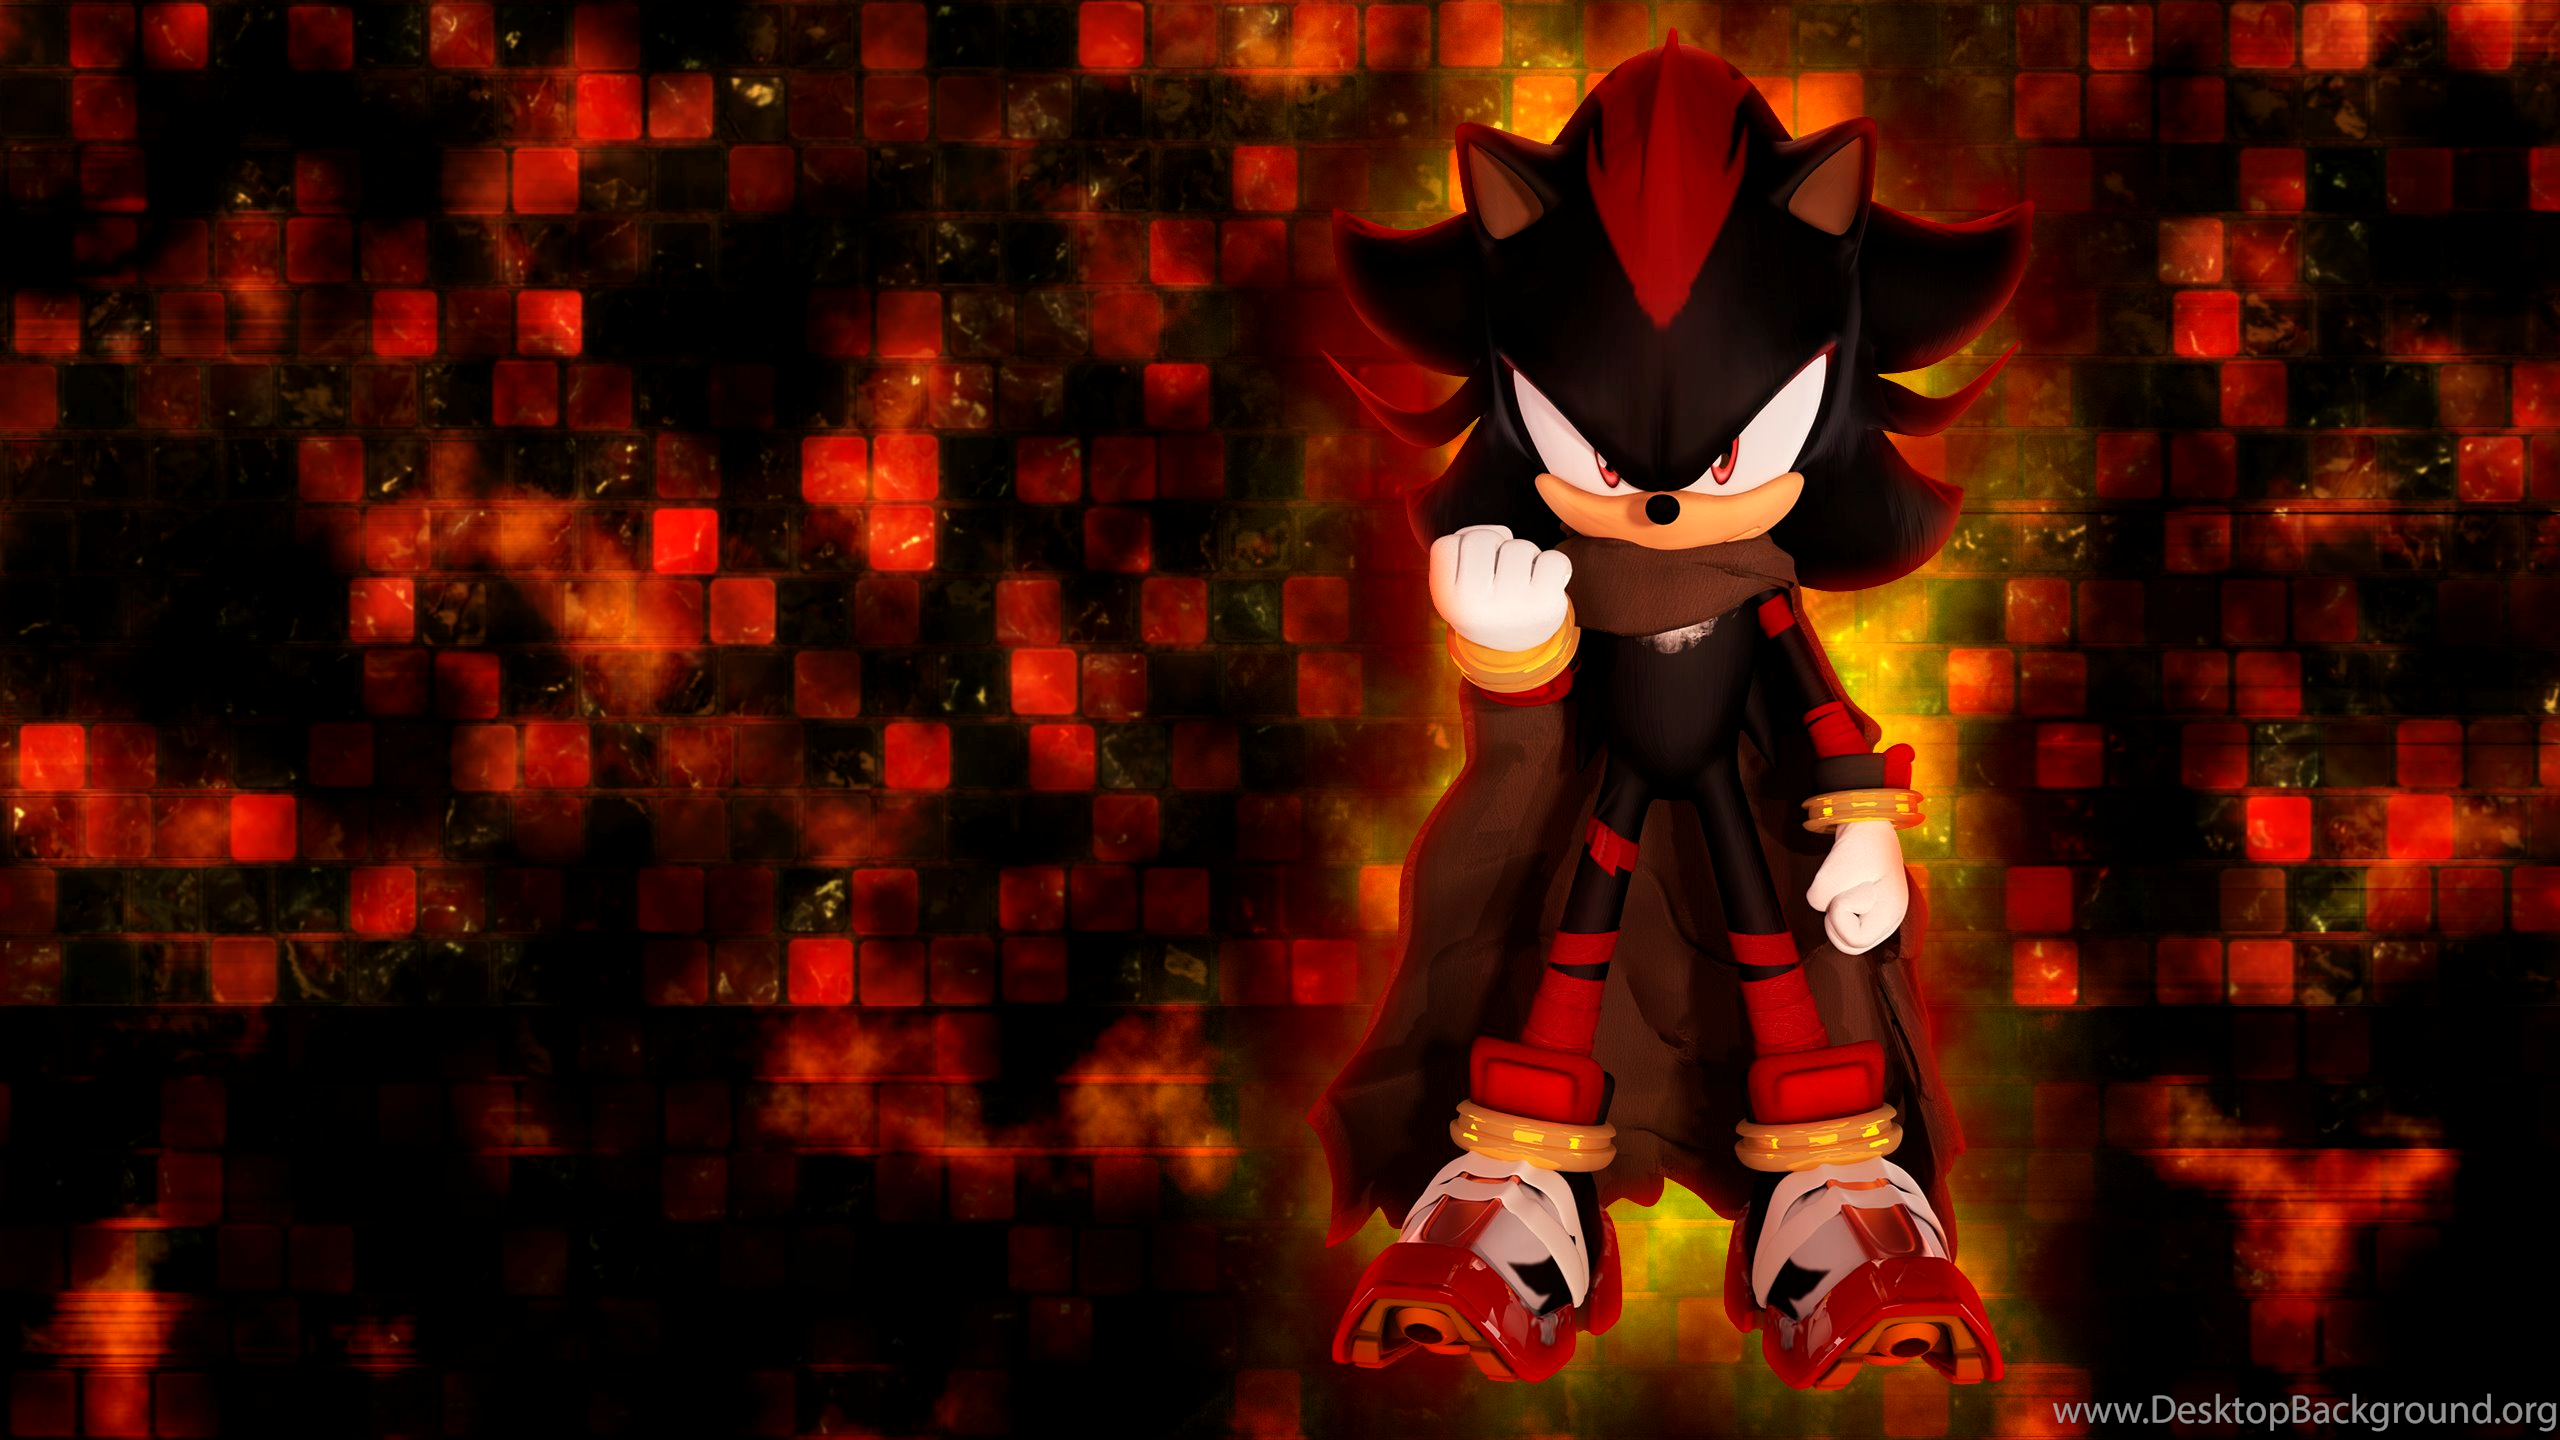 Shadow The Hedgehog From Sonic Boom In 4k By Malcom Lasiurus On